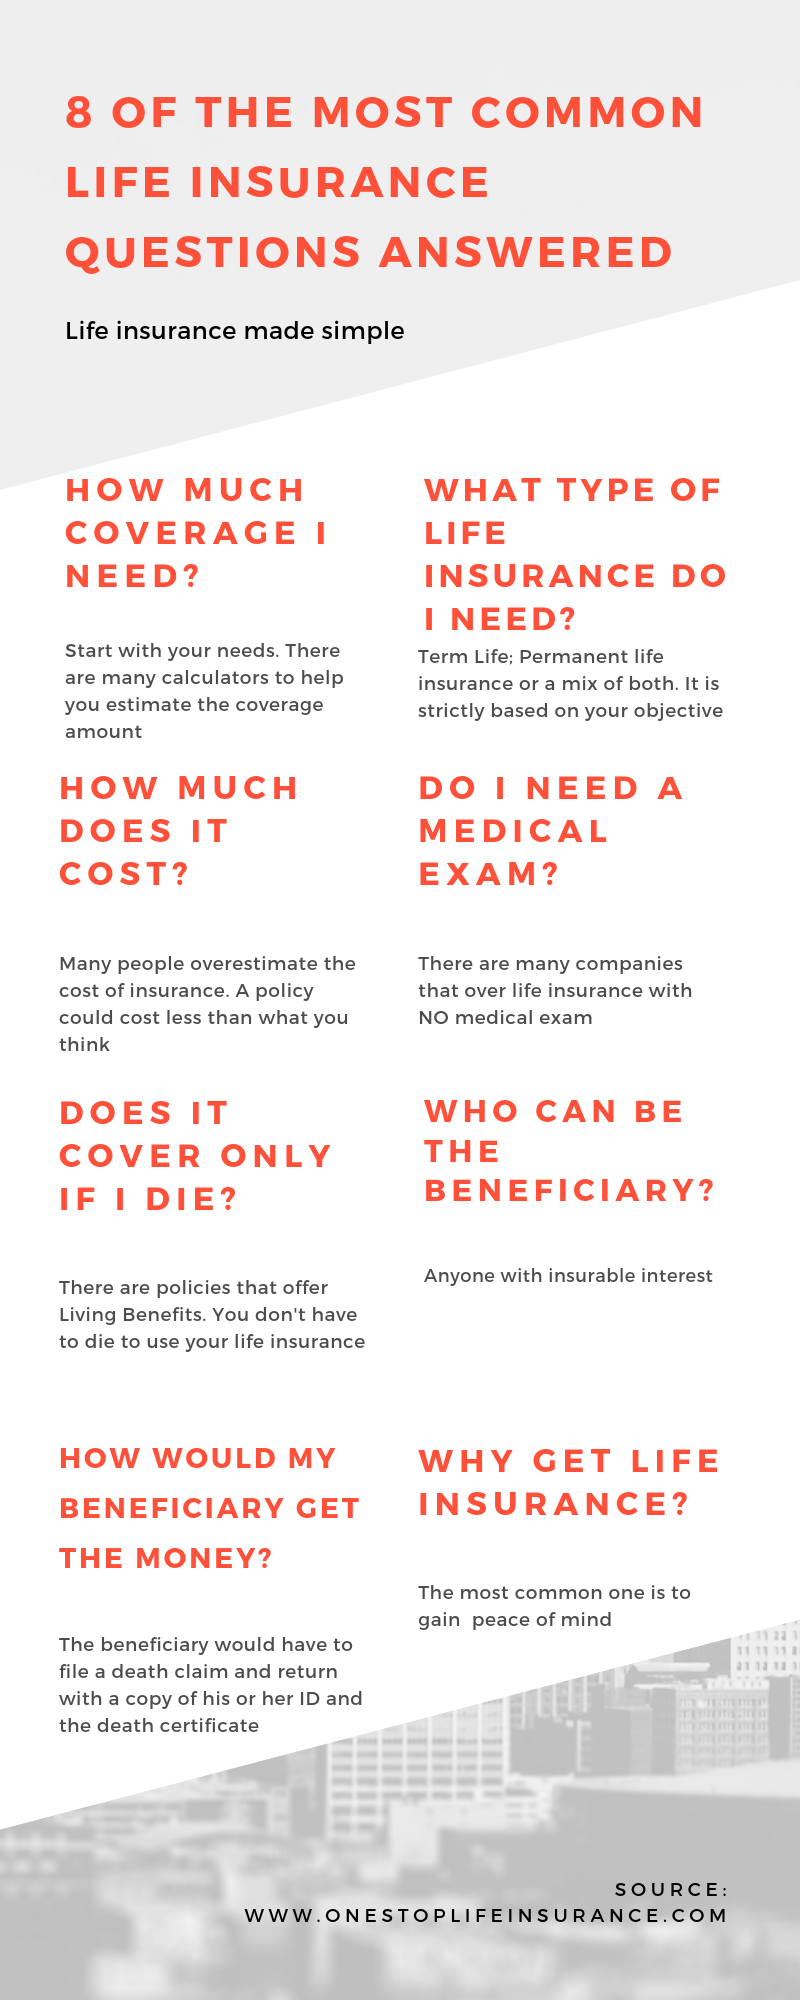 8 of the most common life insurance questions updated 2020